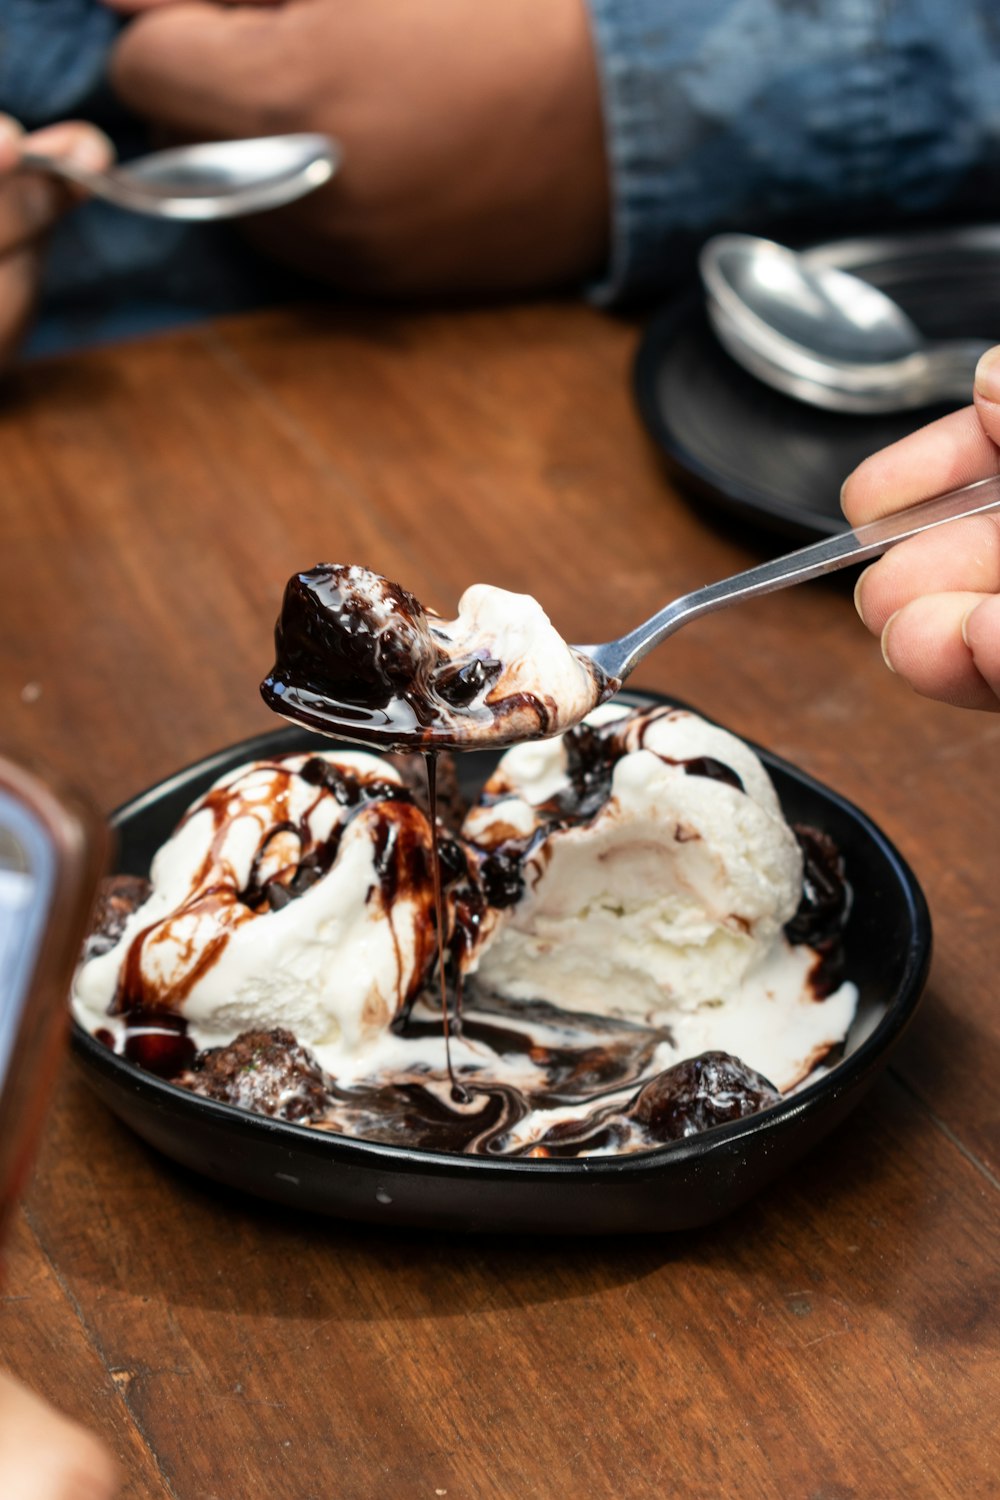 ice cream with chocolate syrup on brown wooden table